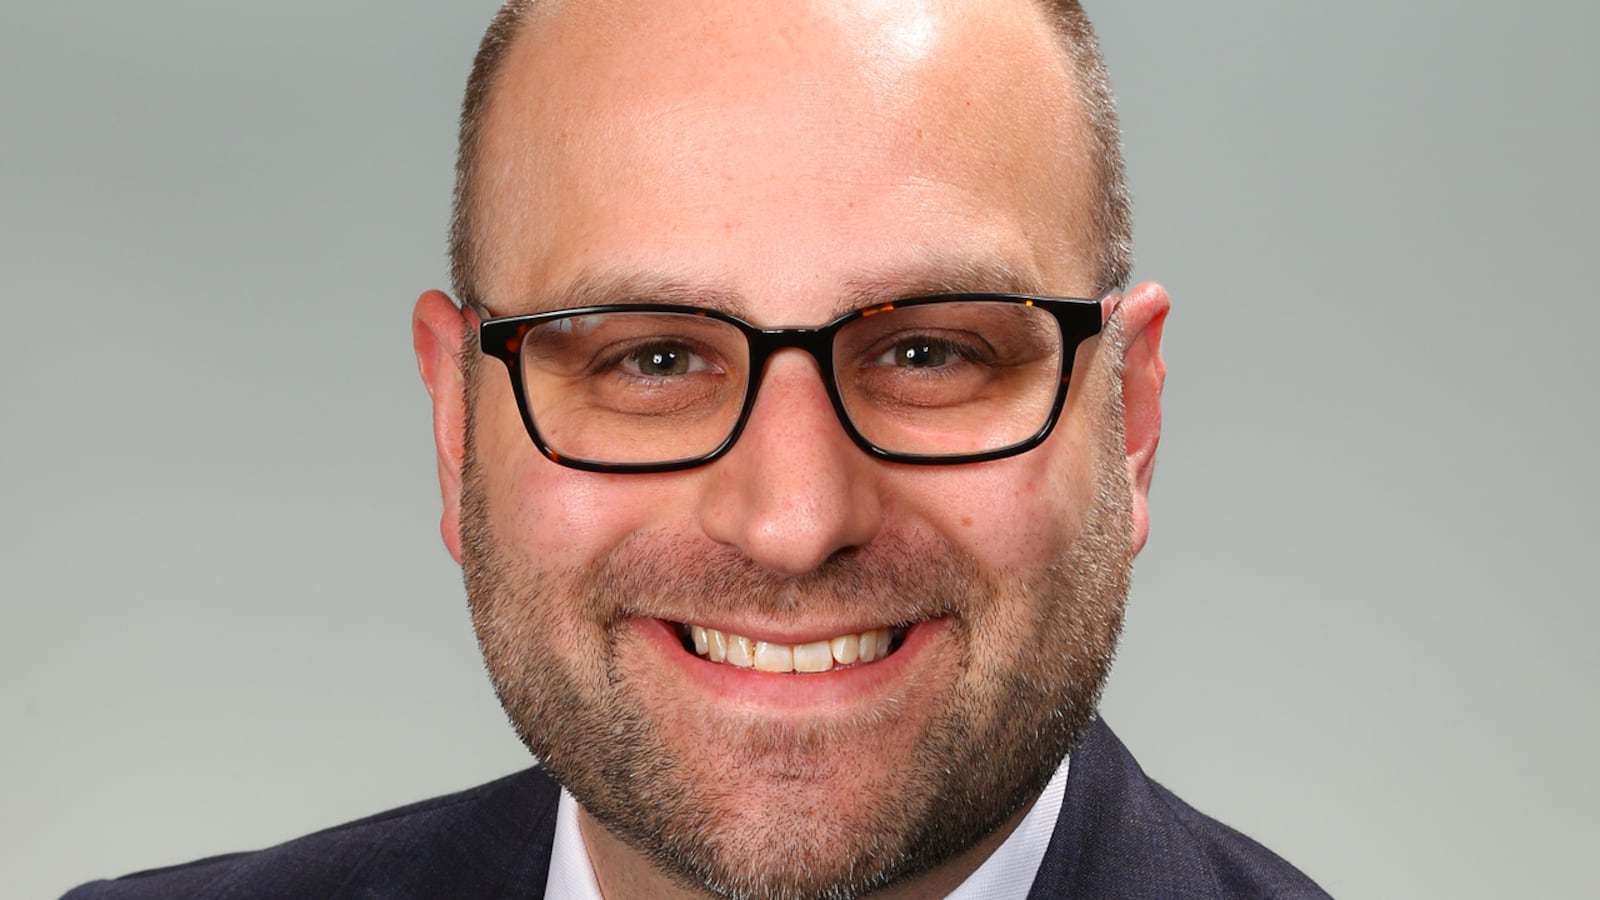 A man with black-framed glasses wearing a dark suit with a yellow tie smiles for a professional headshot.